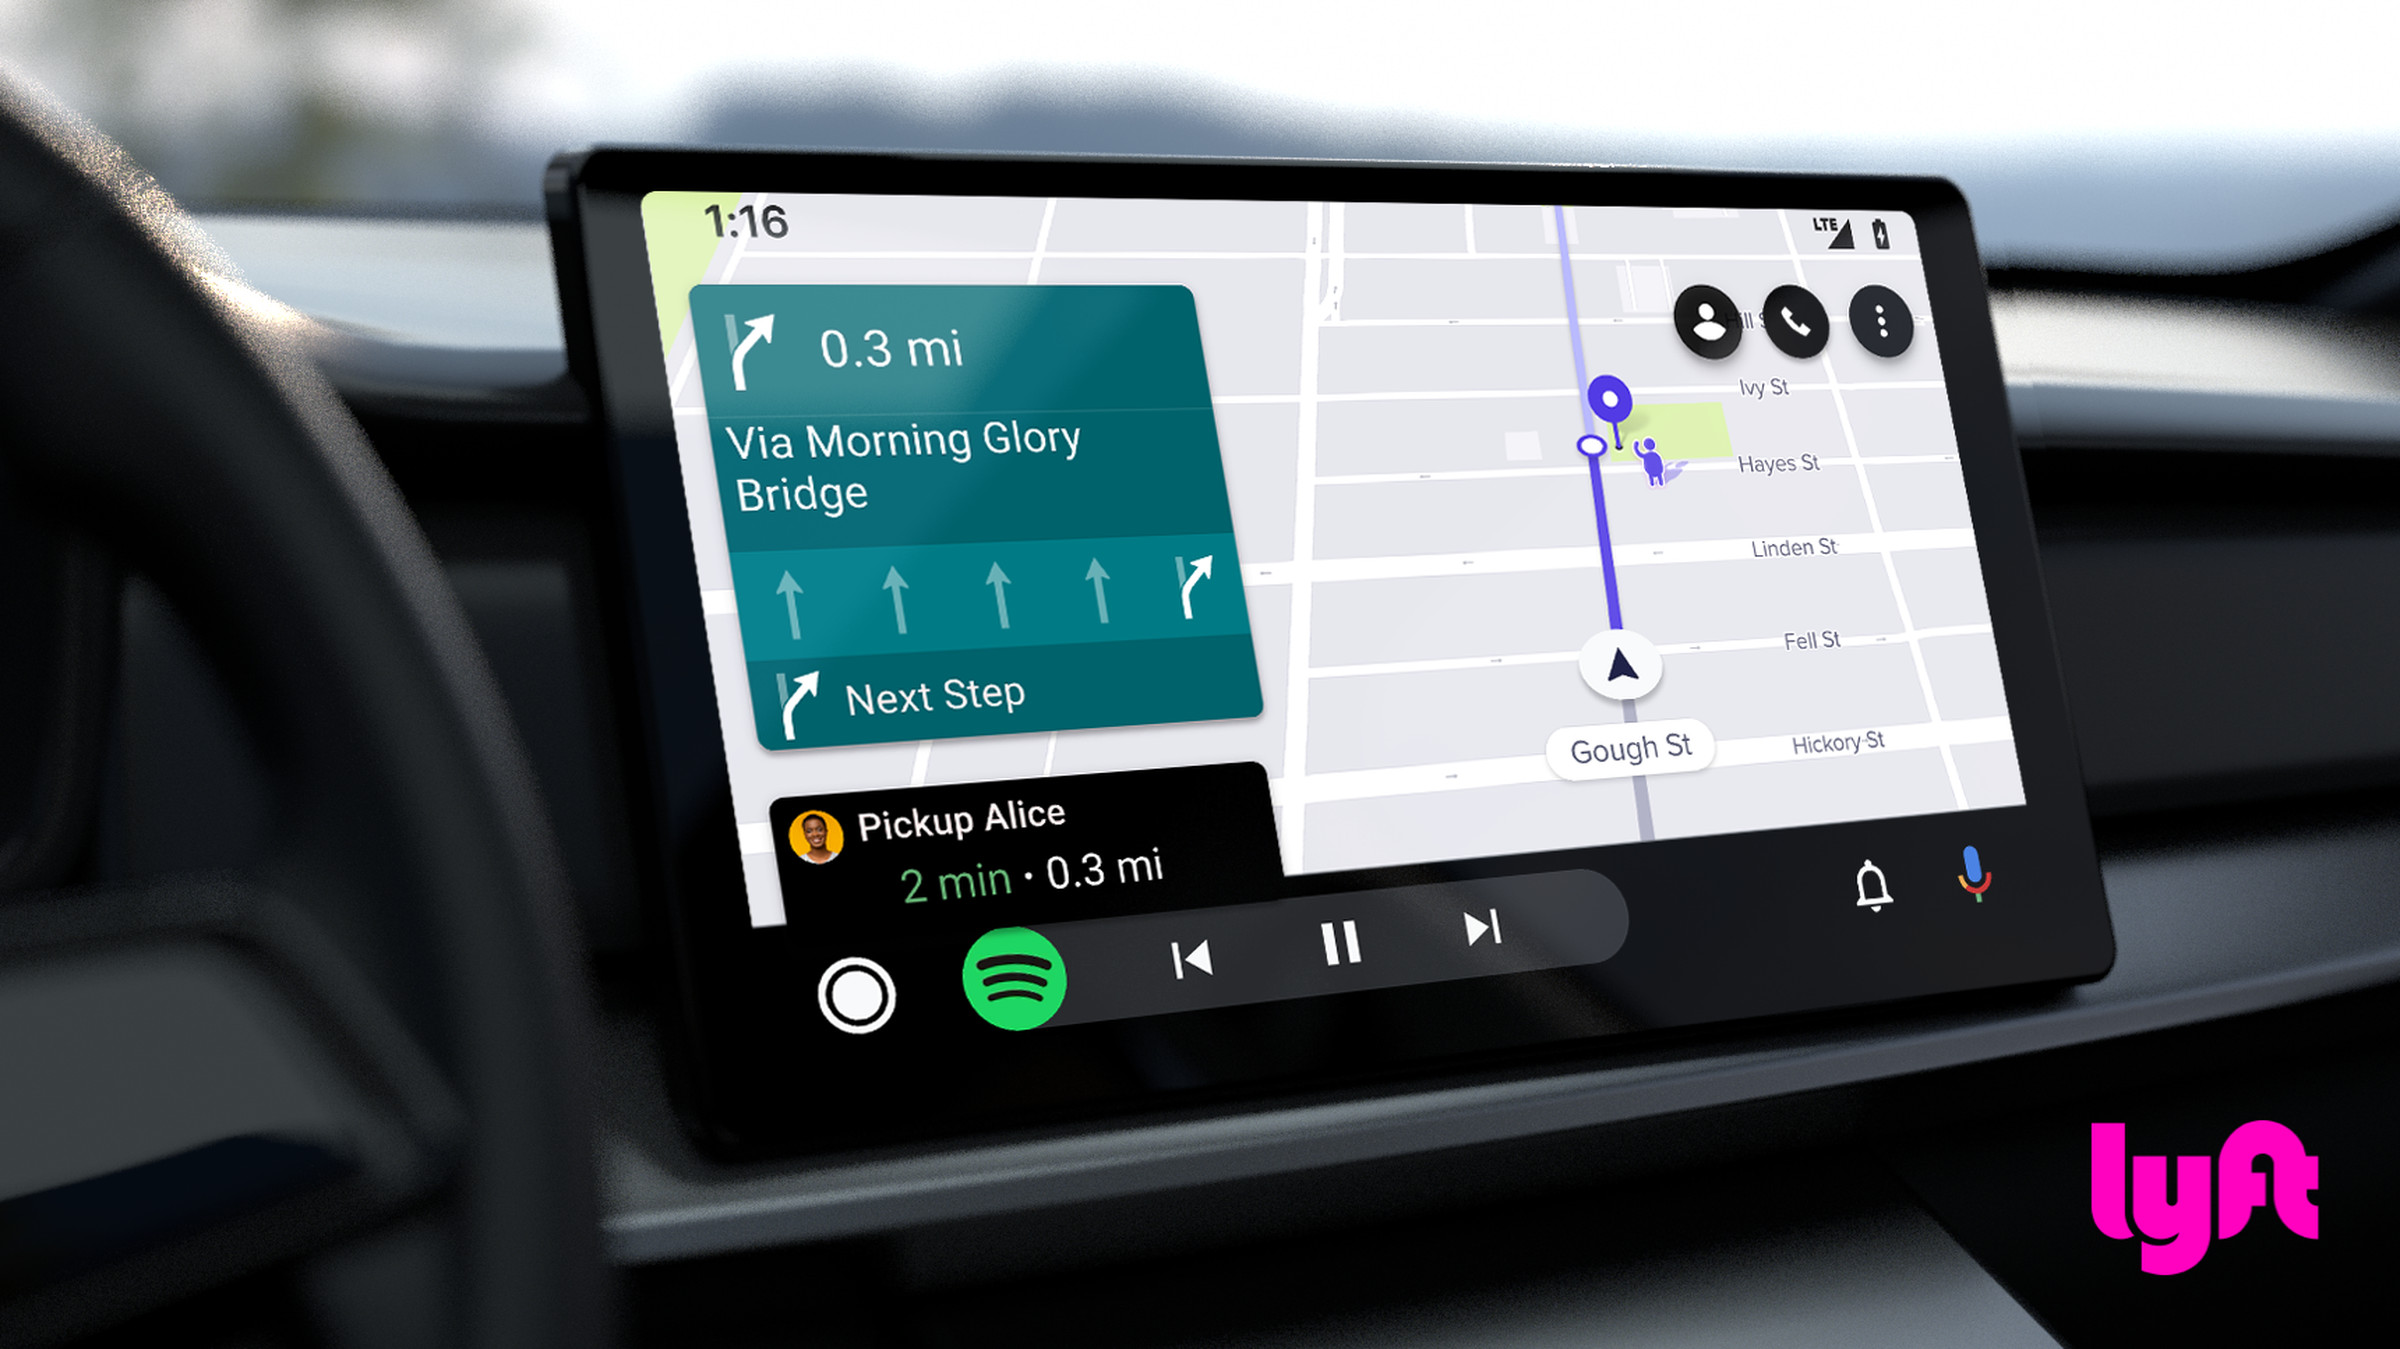 Google says its partnered with Lyft to add Android Auto support for its driver-focused app.